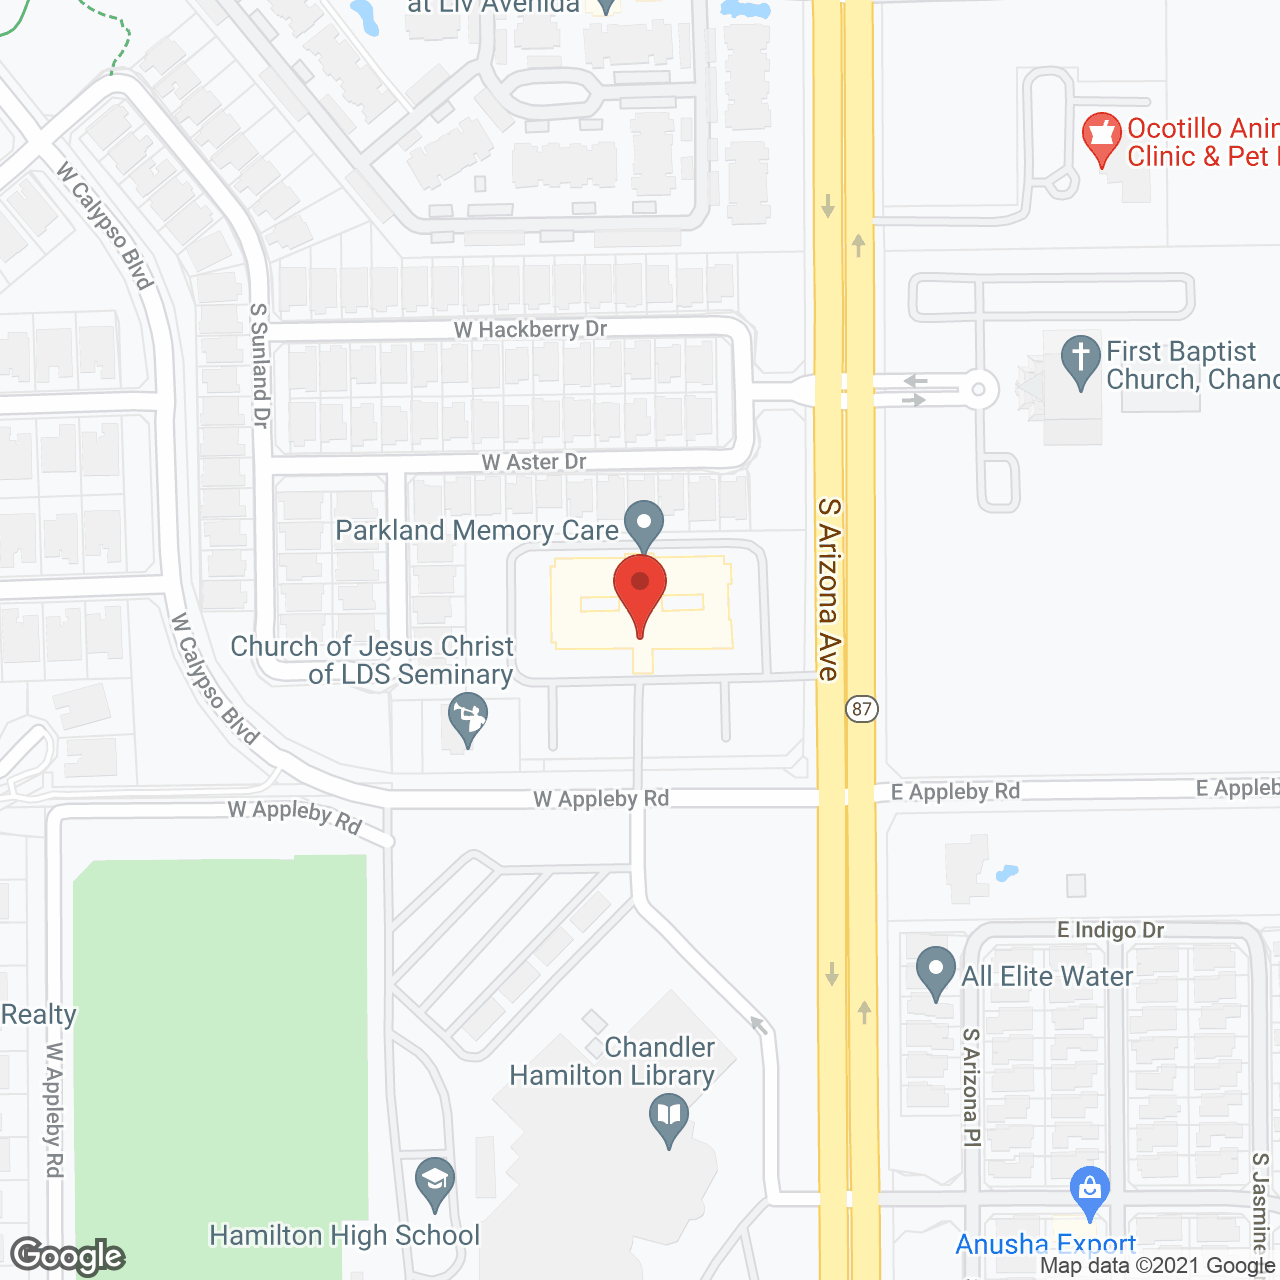 Parkland Memory Care in google map